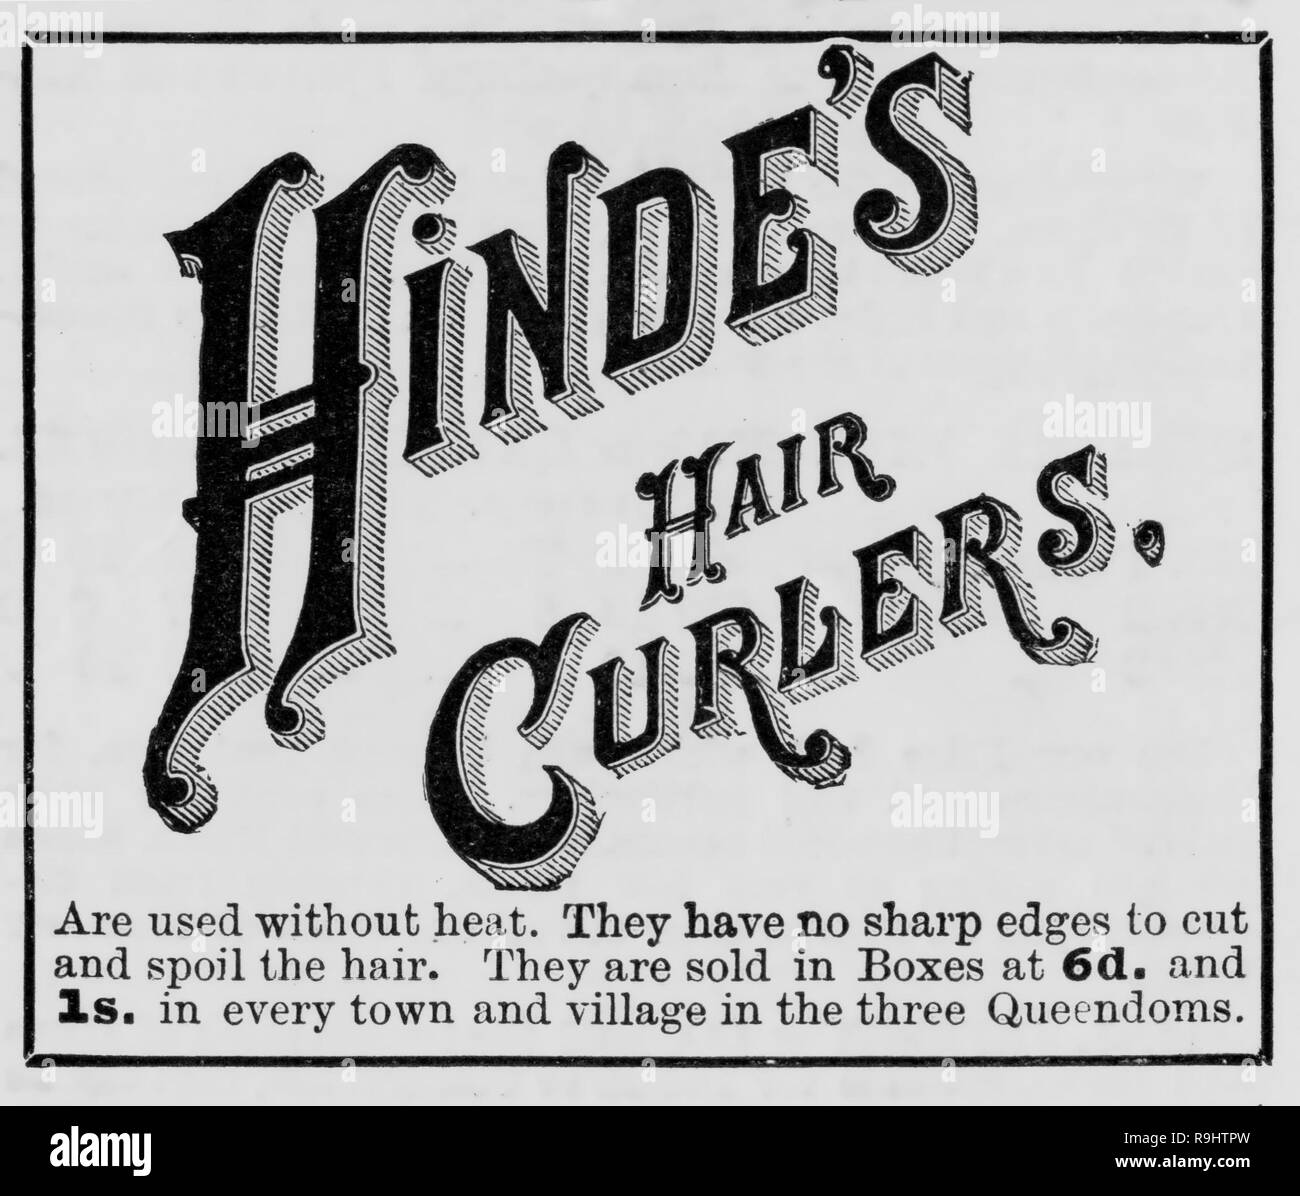 newspaper advert for Hinde's hair curlers, from Illustrated London News from 1887 Stock Photo